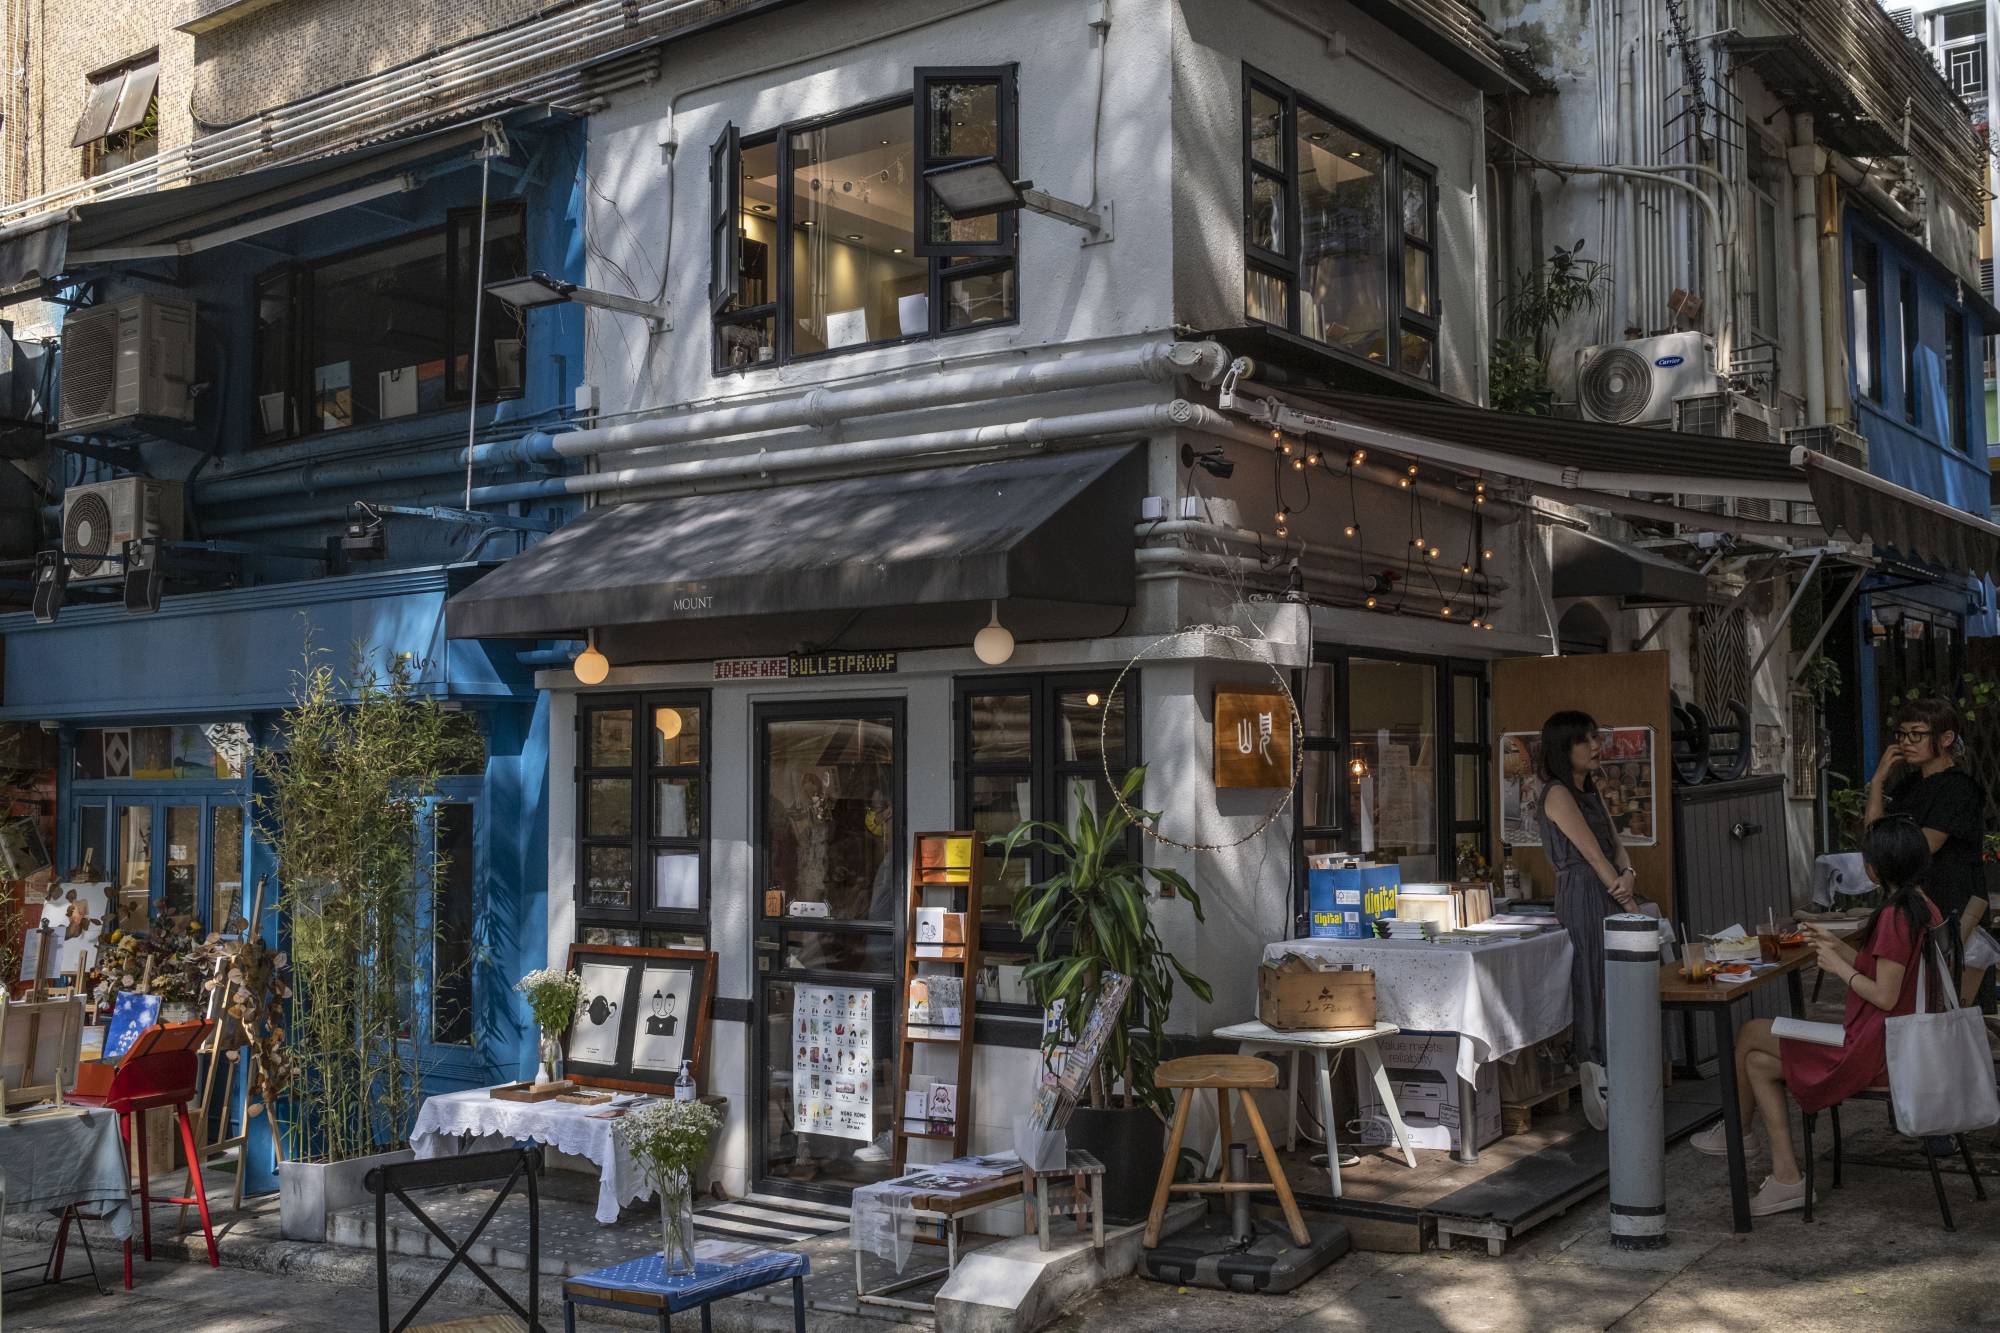 Mount Zero, an independent bookstore in Sheung Wan, Hong Kong. Many independent bookstores have strengthened their resolve to connect with their readers and crystallized their roles as vibrant community hubs.  | LAM YIK FEI / THE NEW YORK TIMES